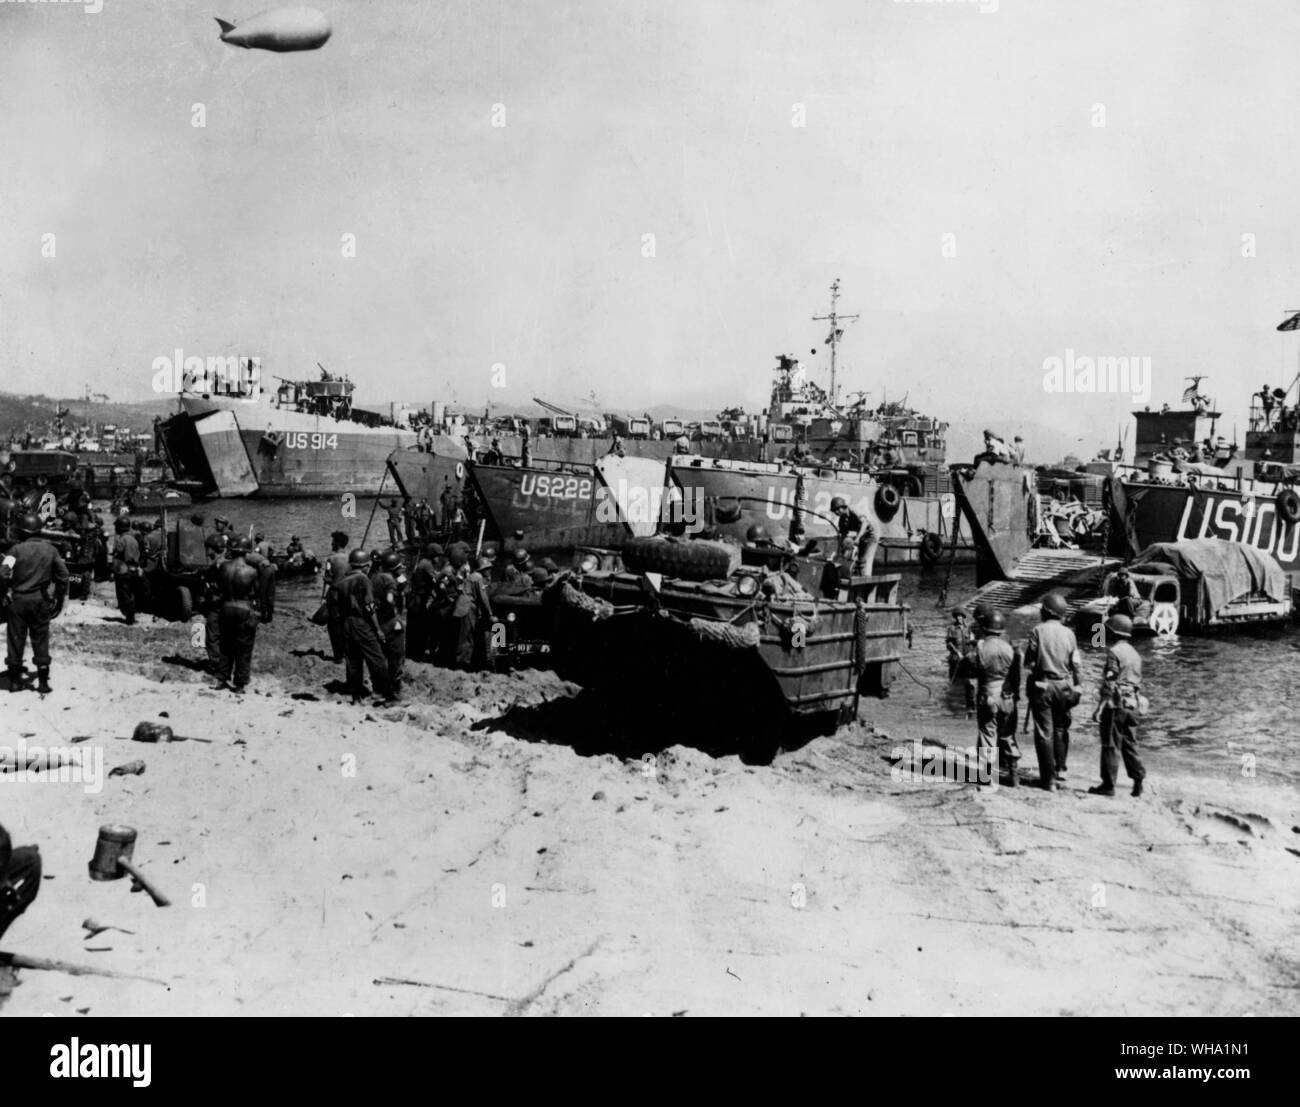 WW2: Landing in Southern France, 1944. US troops in landing craft arrive on the beaches. Stock Photo